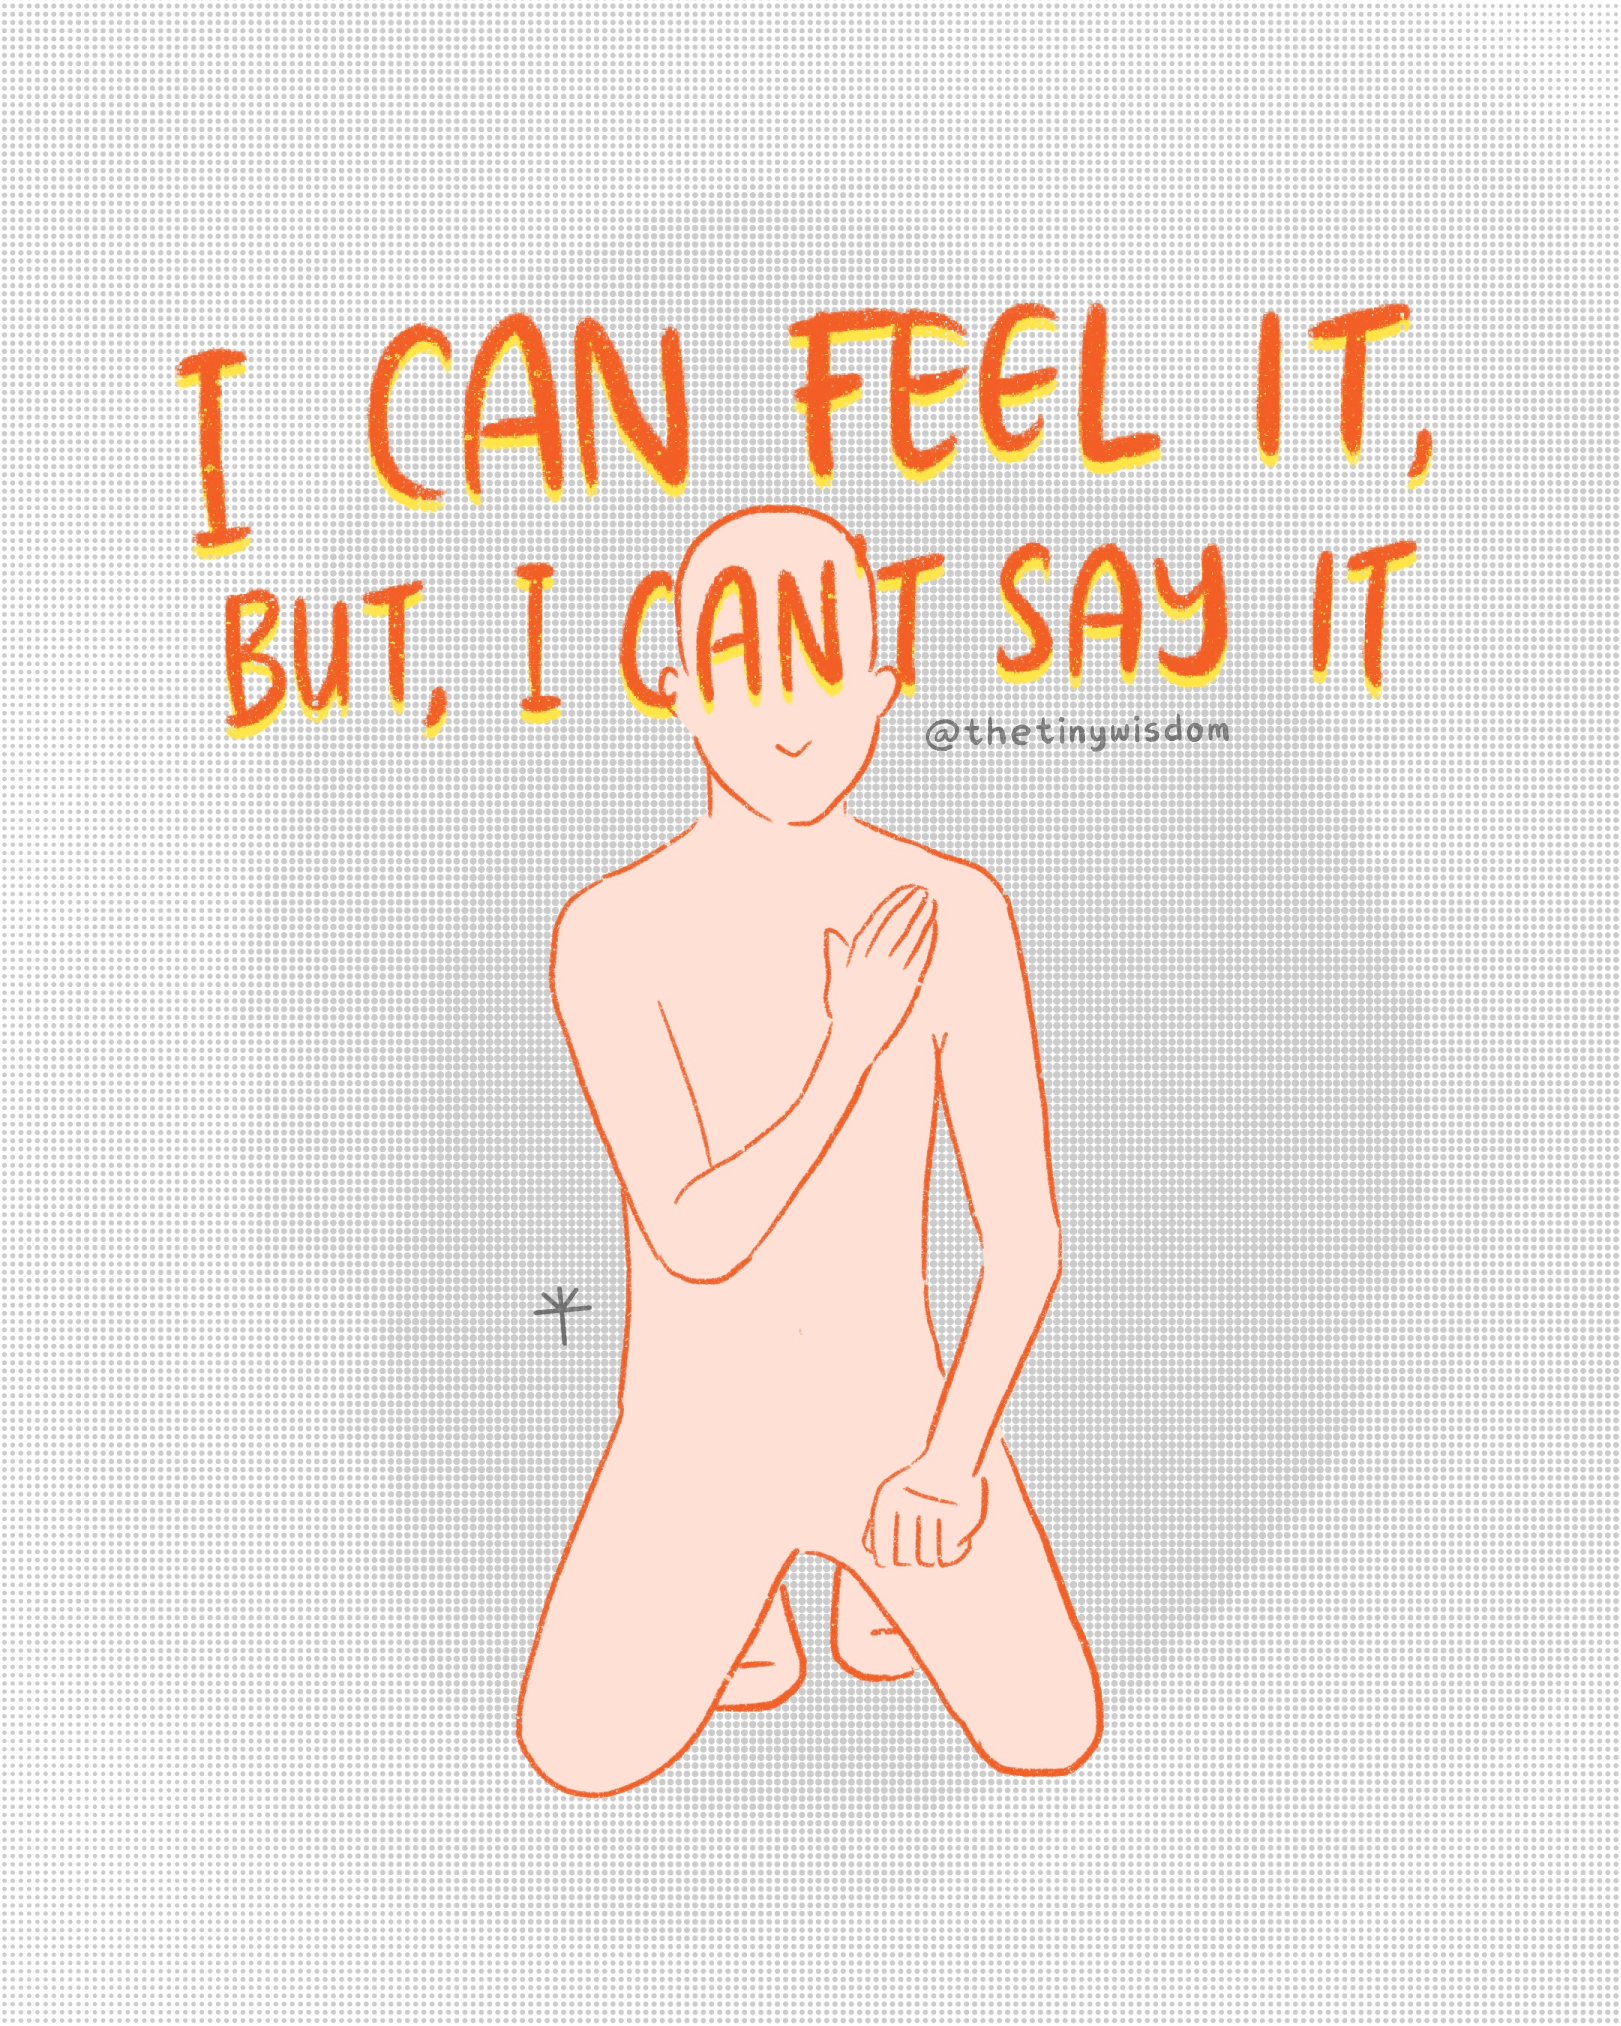 I can feel it, but I can't say it